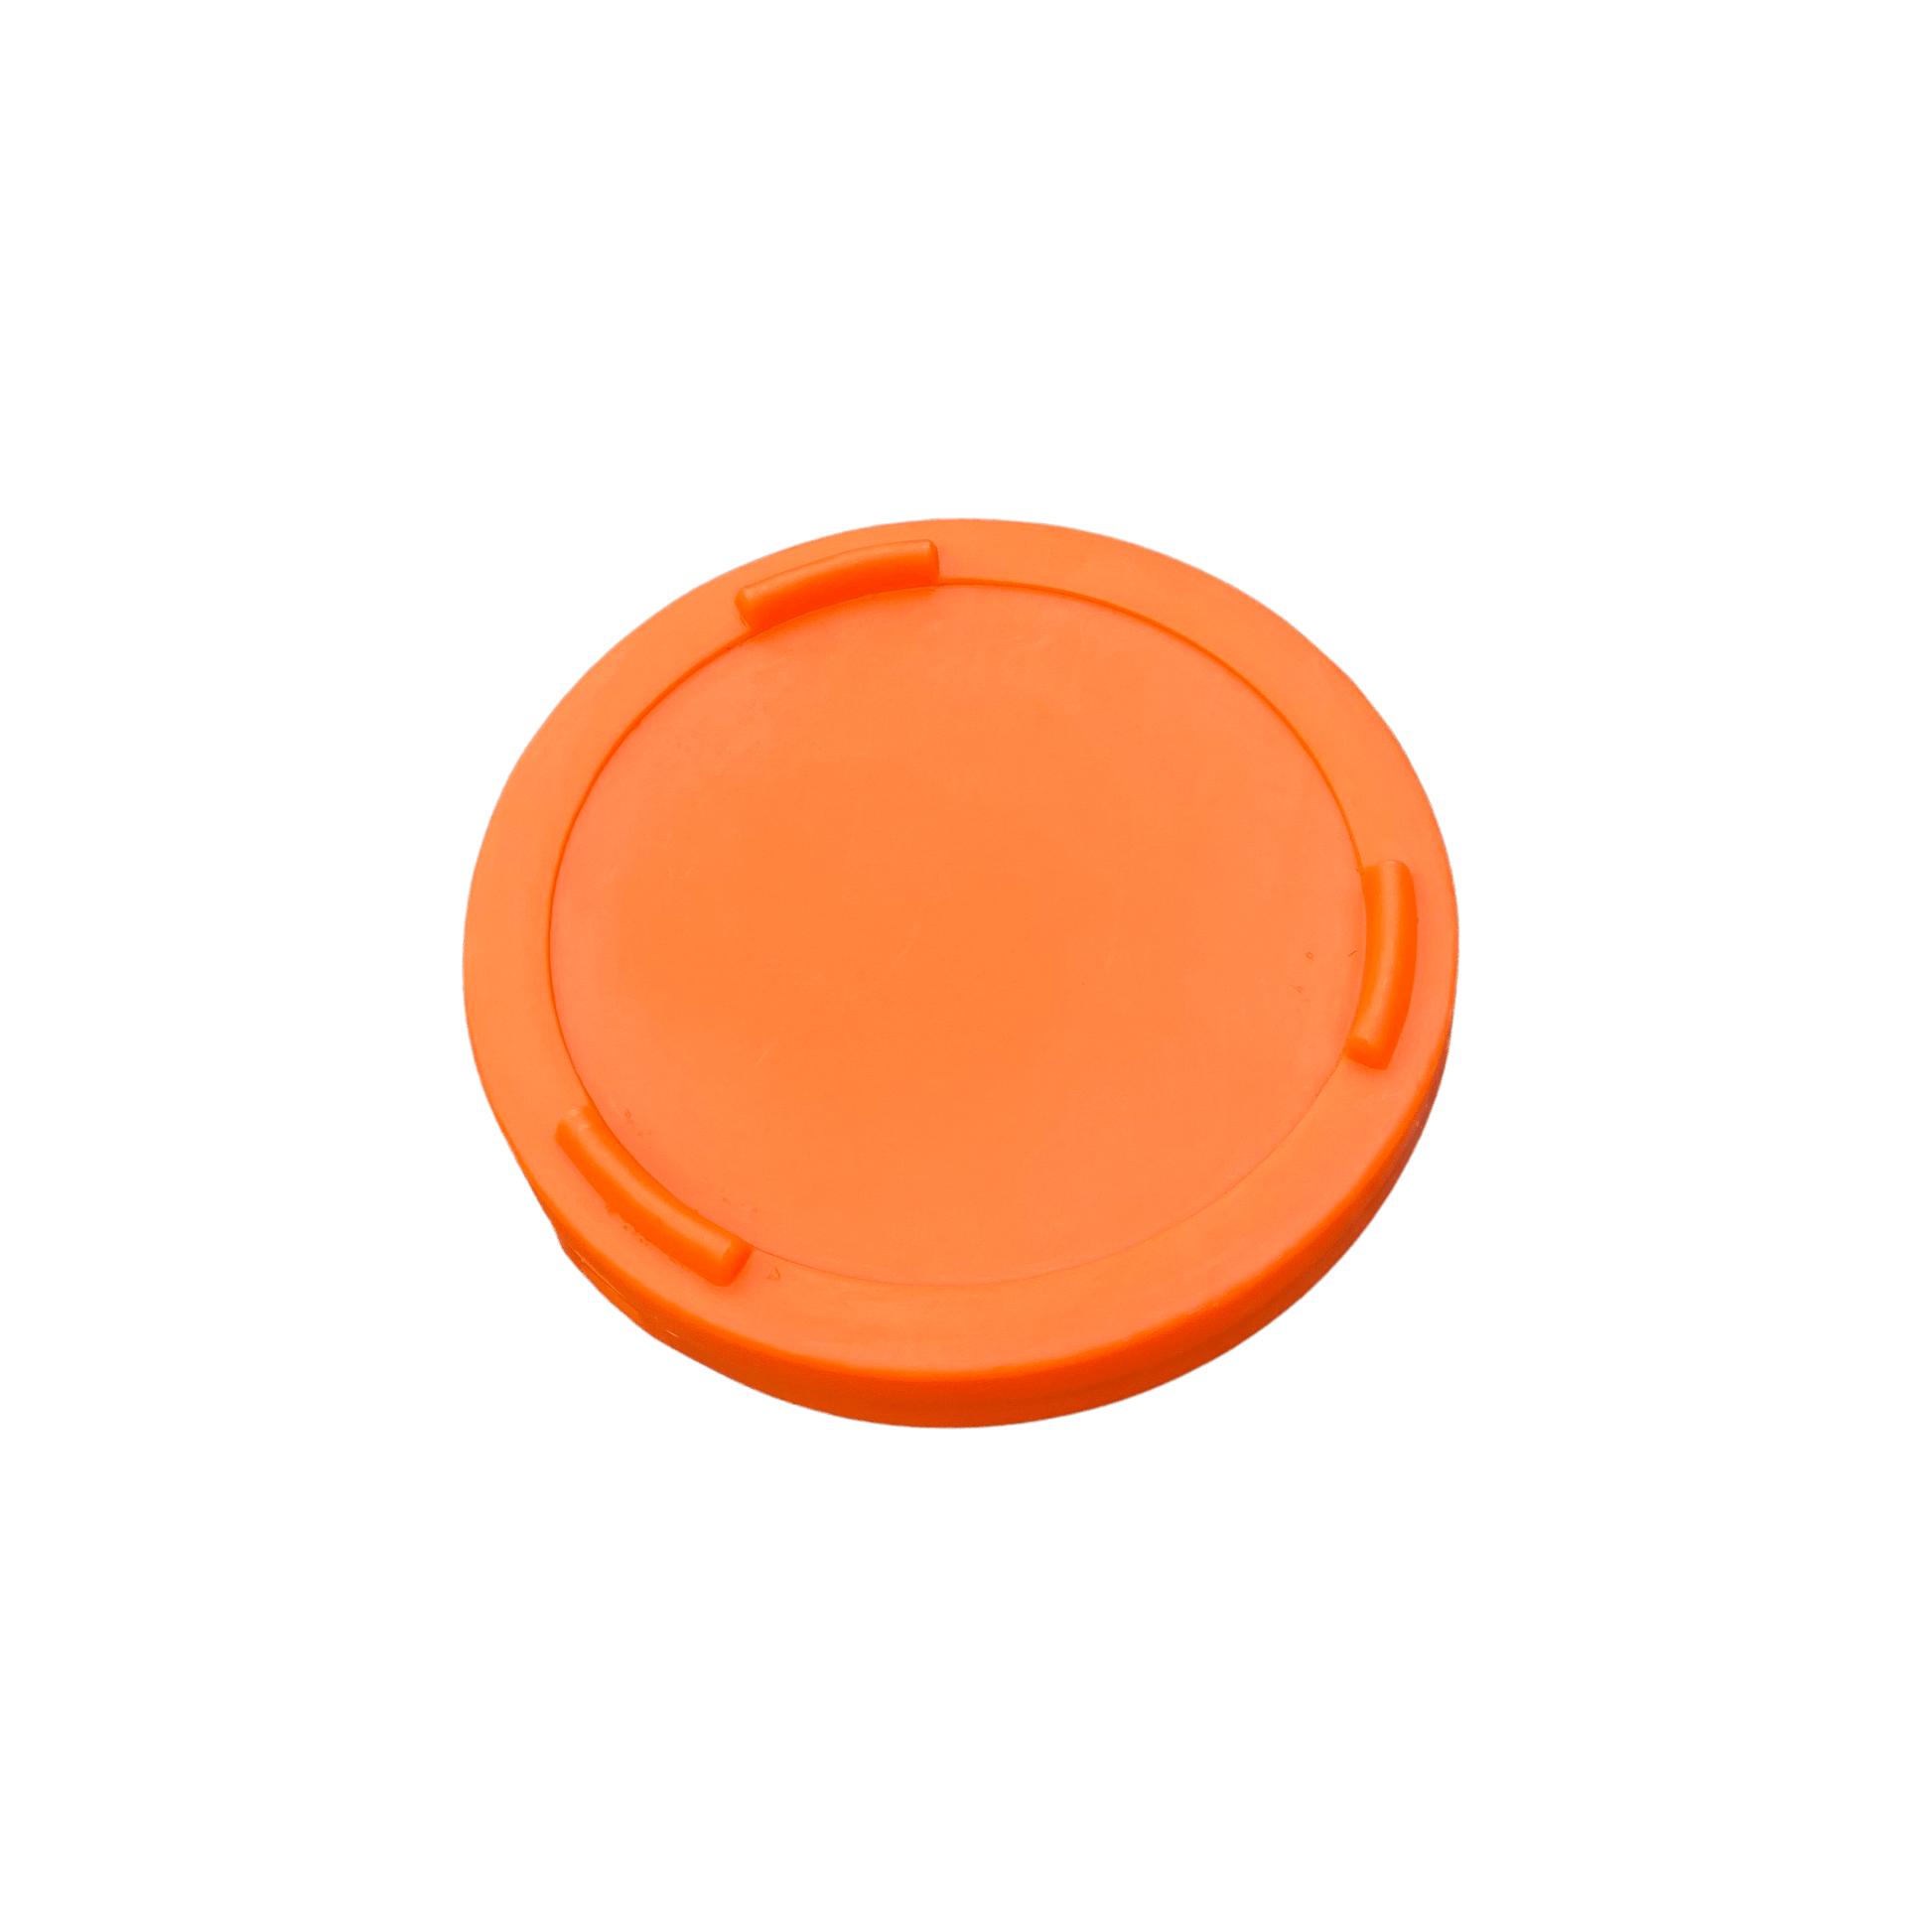 Classic Show Jumps Stable Accessories Invigorate Orange Lid for Stacking Feed Bin